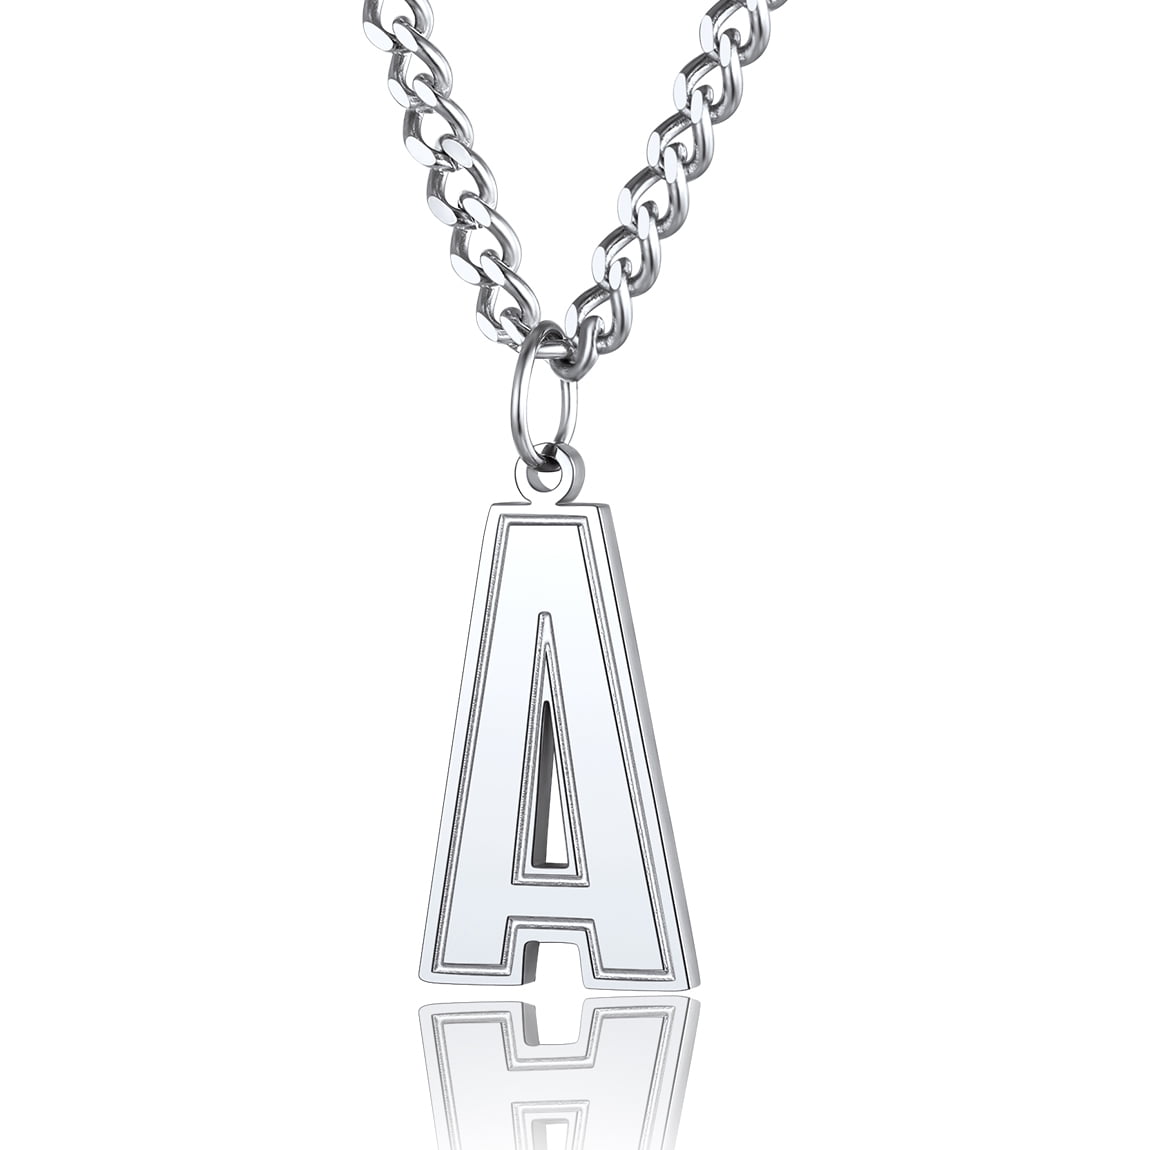 ChainsPro Chain Necklace with Letter J for Mens Jewelry Gifts s 18K Gold Plated Chain